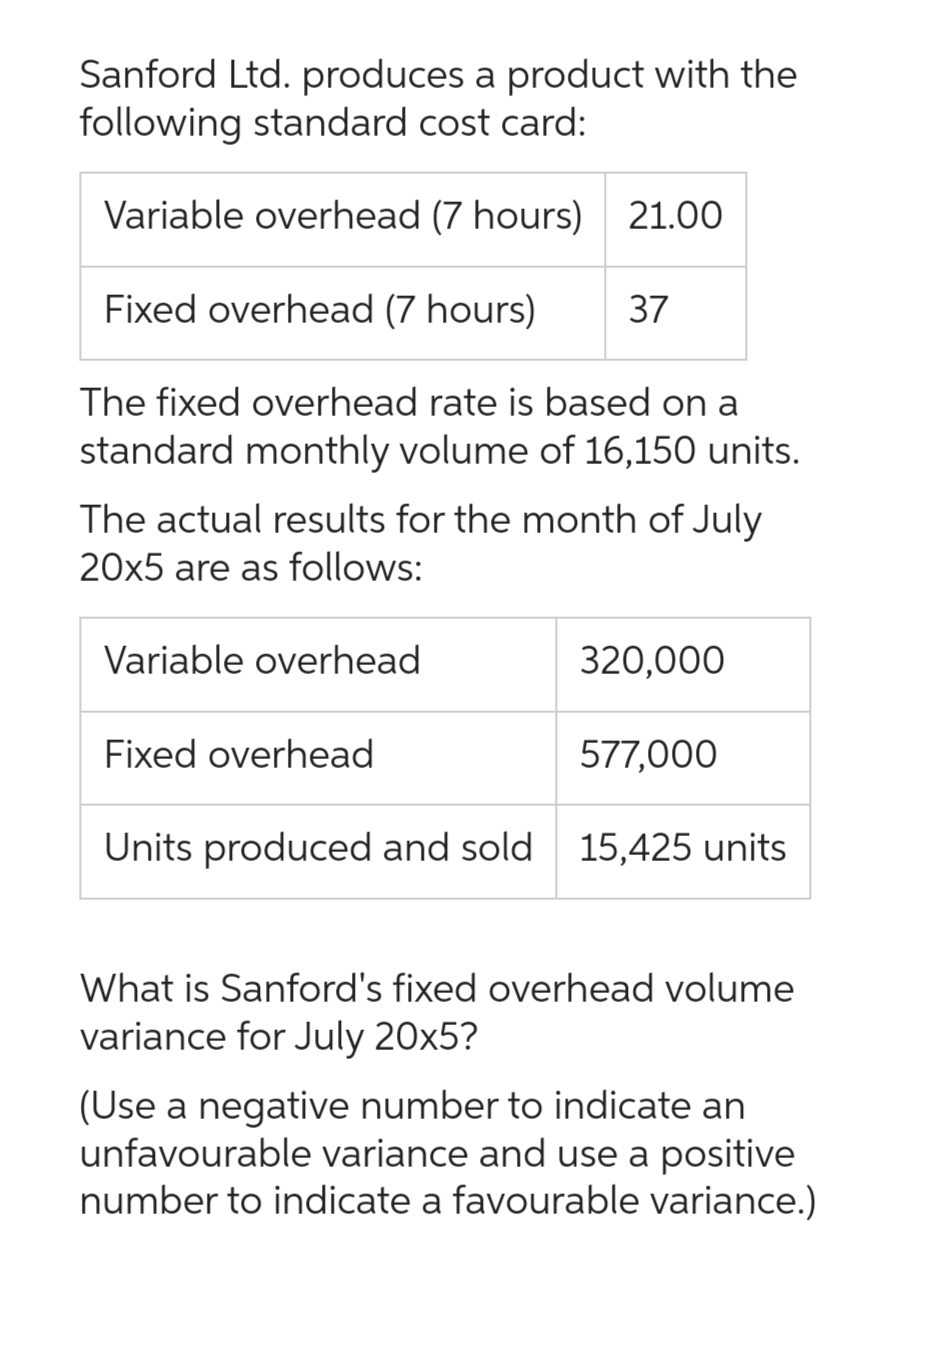 Sanford Ltd. produces a product with the
following standard cost card:
Variable overhead (7 hours) 21.00
Fixed overhead (7 hours) 37
The fixed overhead rate is based on a
standard monthly volume of 16,150 units.
The actual results for the month of July
20x5 are as follows:
Variable overhead
Fixed overhead
320,000
577,000
Units produced and sold 15,425 units
What is Sanford's fixed overhead volume
variance for July 20x5?
(Use a negative number to indicate an
unfavourable variance and use a positive
number to indicate a favourable variance.)